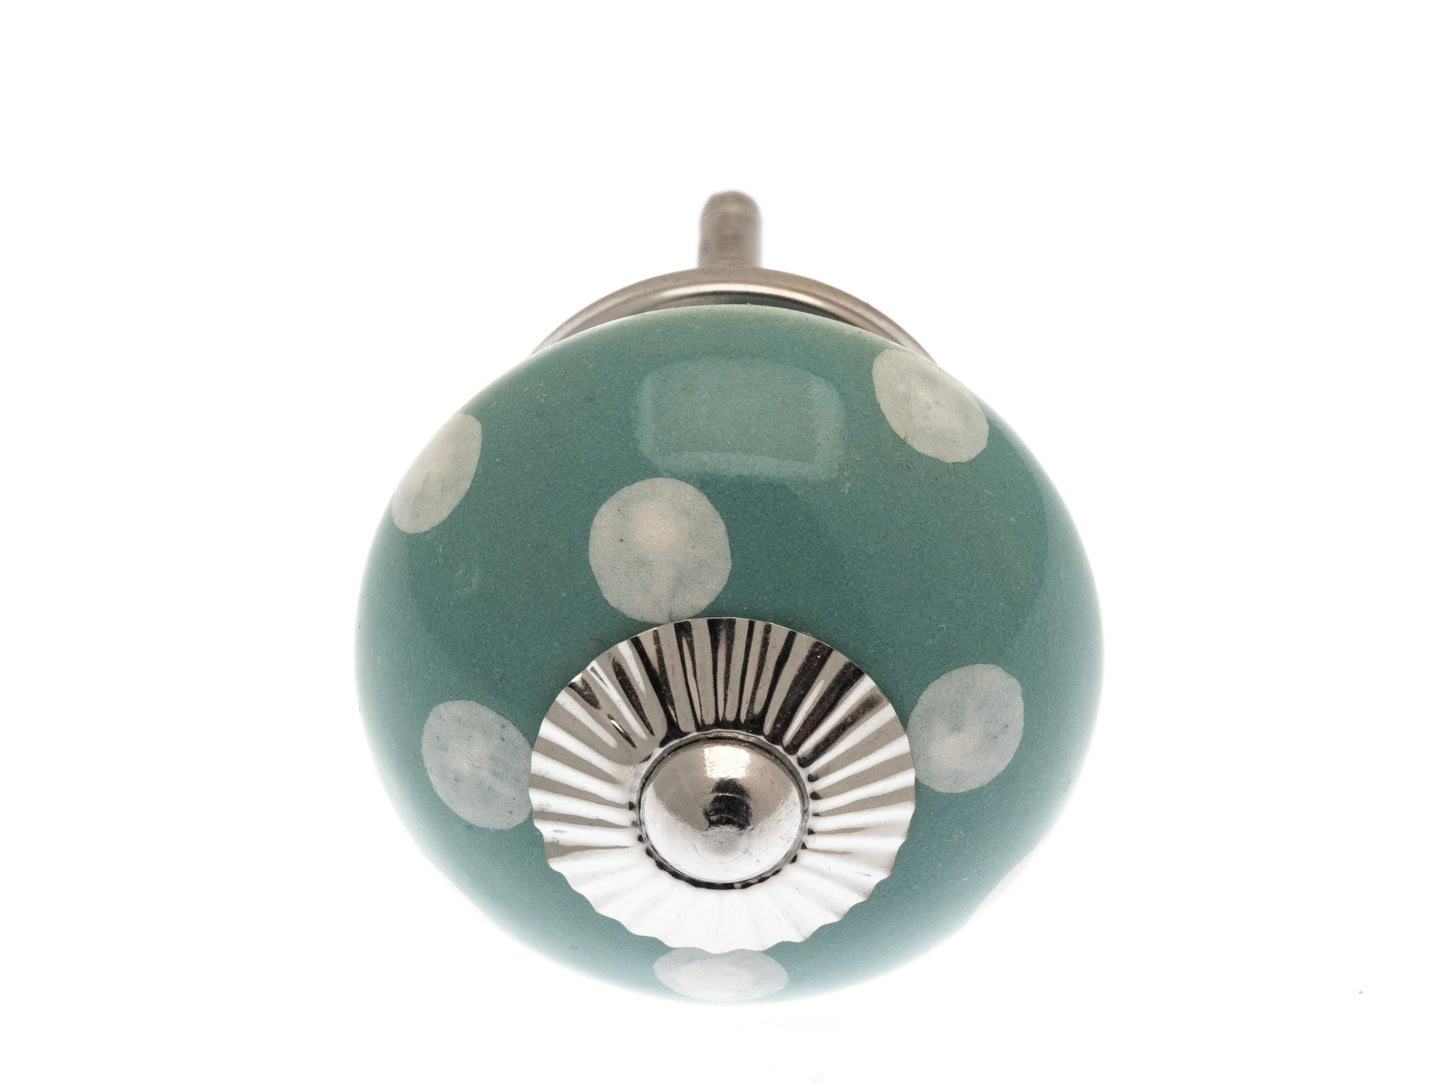 Ceramic Cupboard Door Knobs Turquoise with White Spots